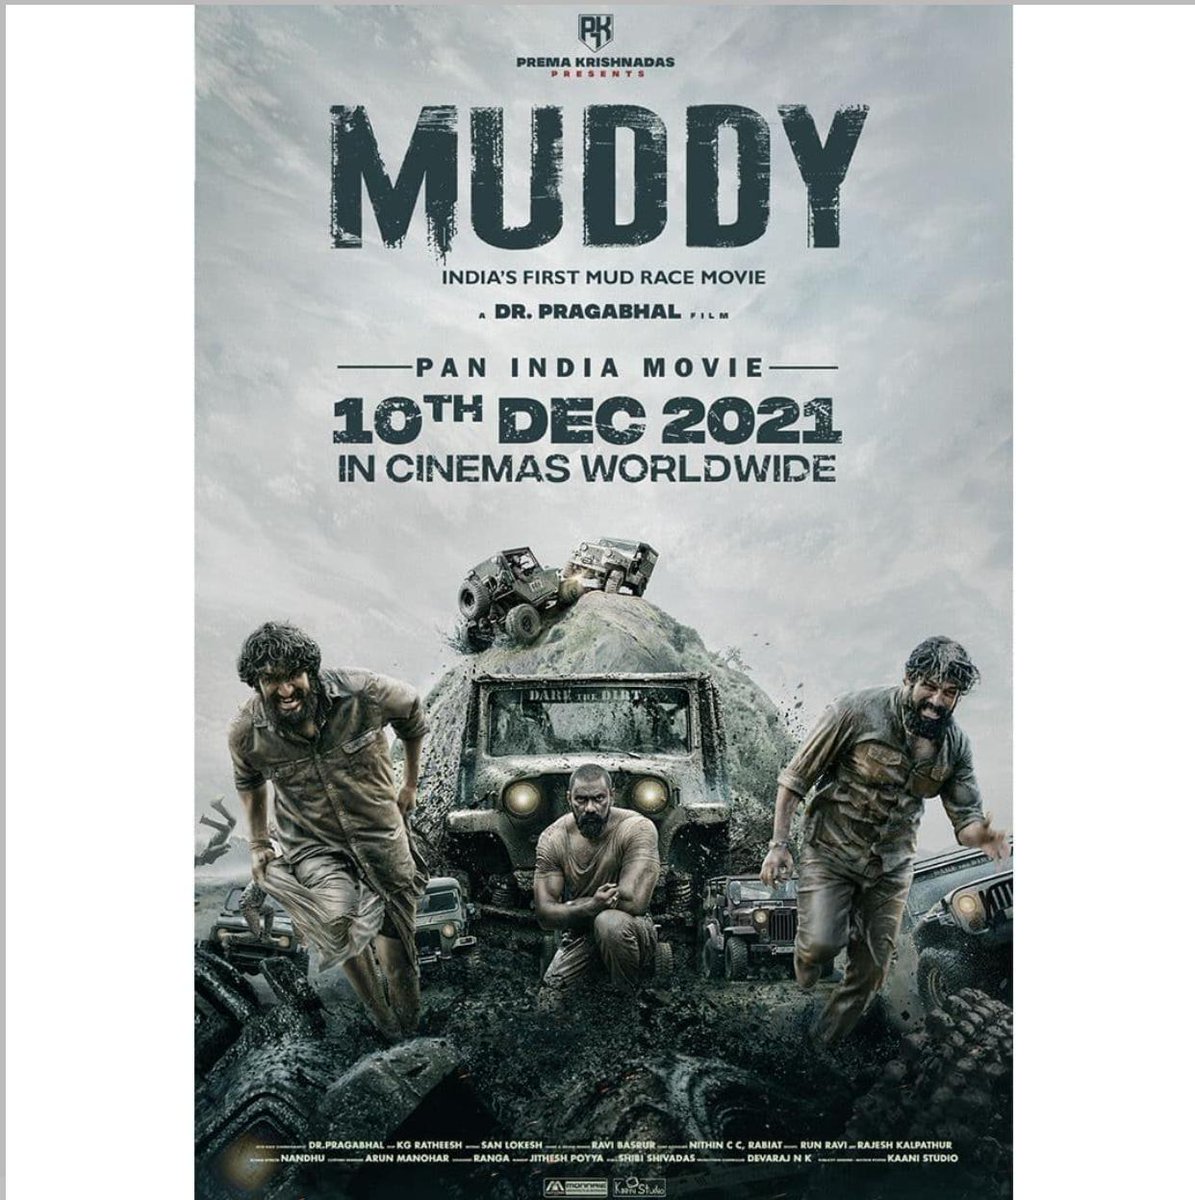 Muddy Our new film